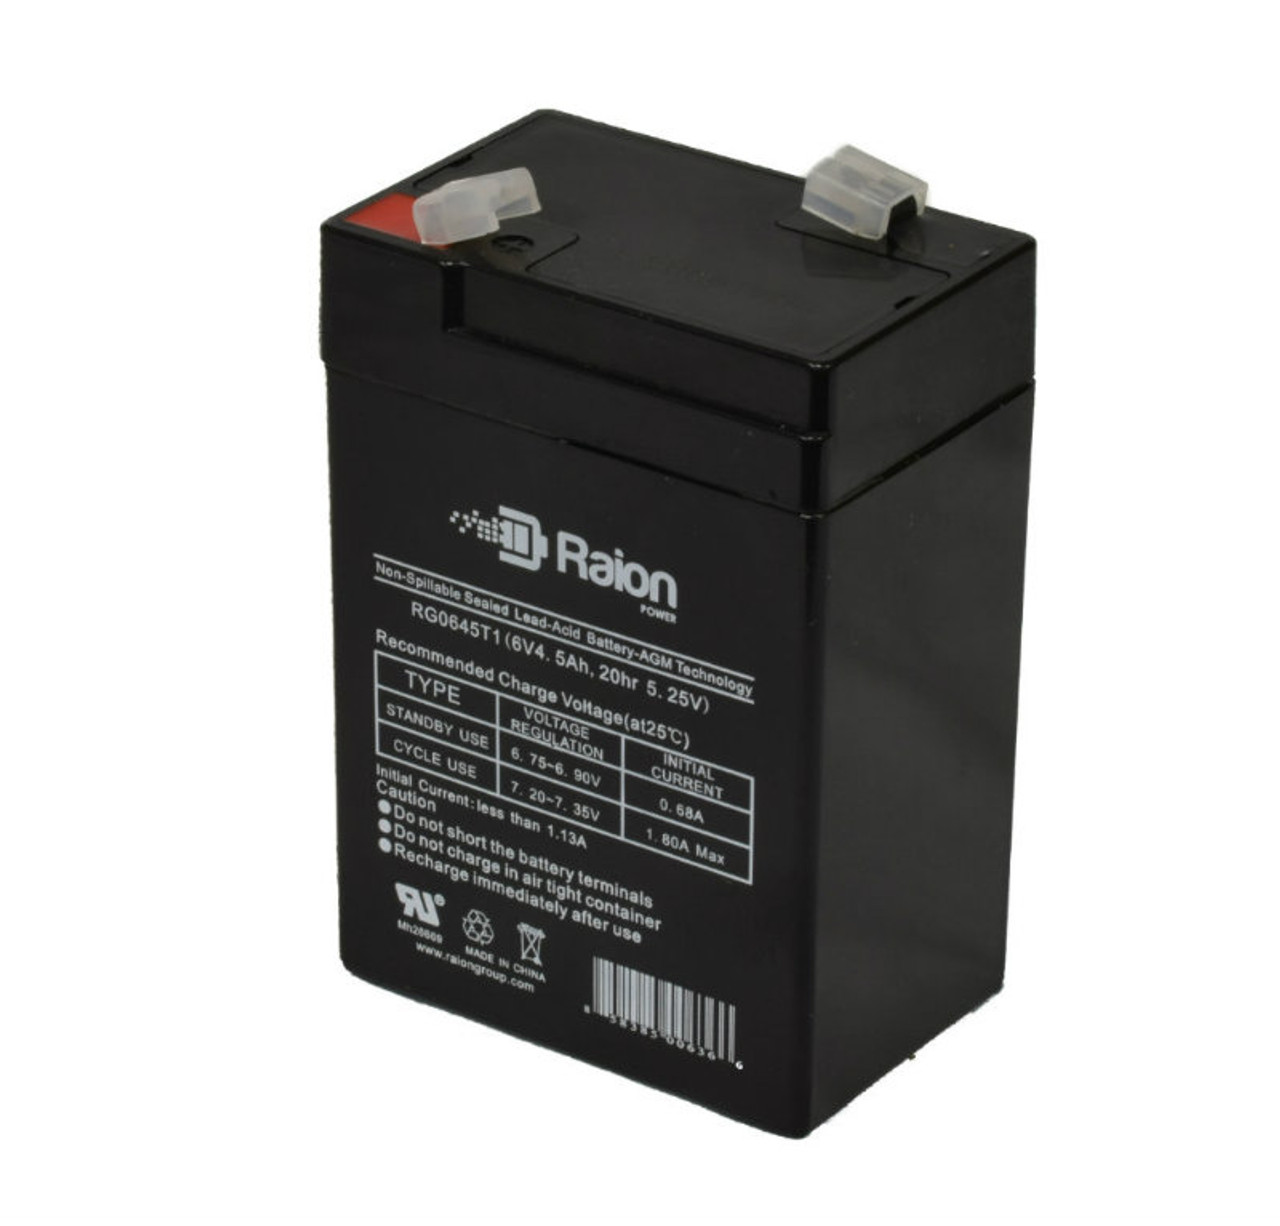 Raion Power RG0645T1 6V 4.5Ah Replacement Battery Cartridge for Lithonia ELB-06042